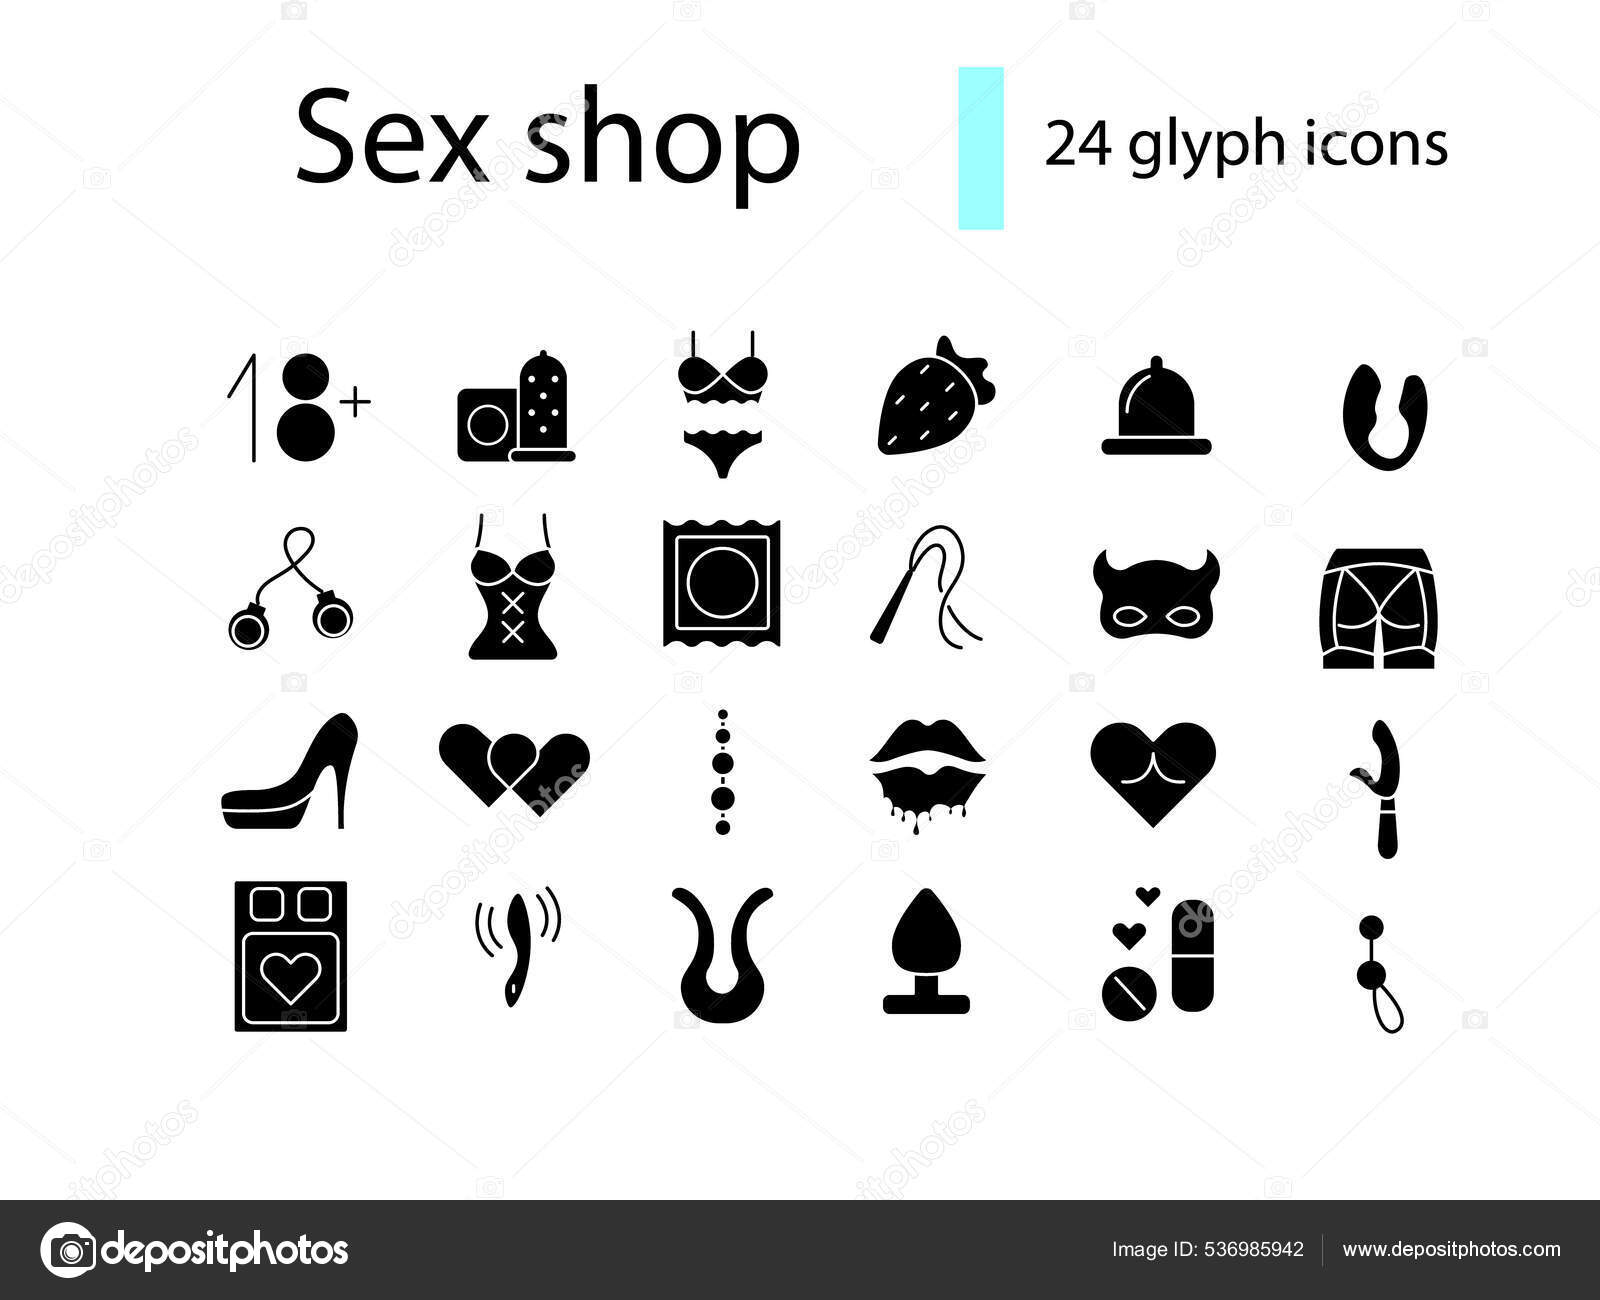 Erotic Goods Glyph Icons Set Sex Shop Adult Toys Products Stock Vector by ©agapeeva 536985942